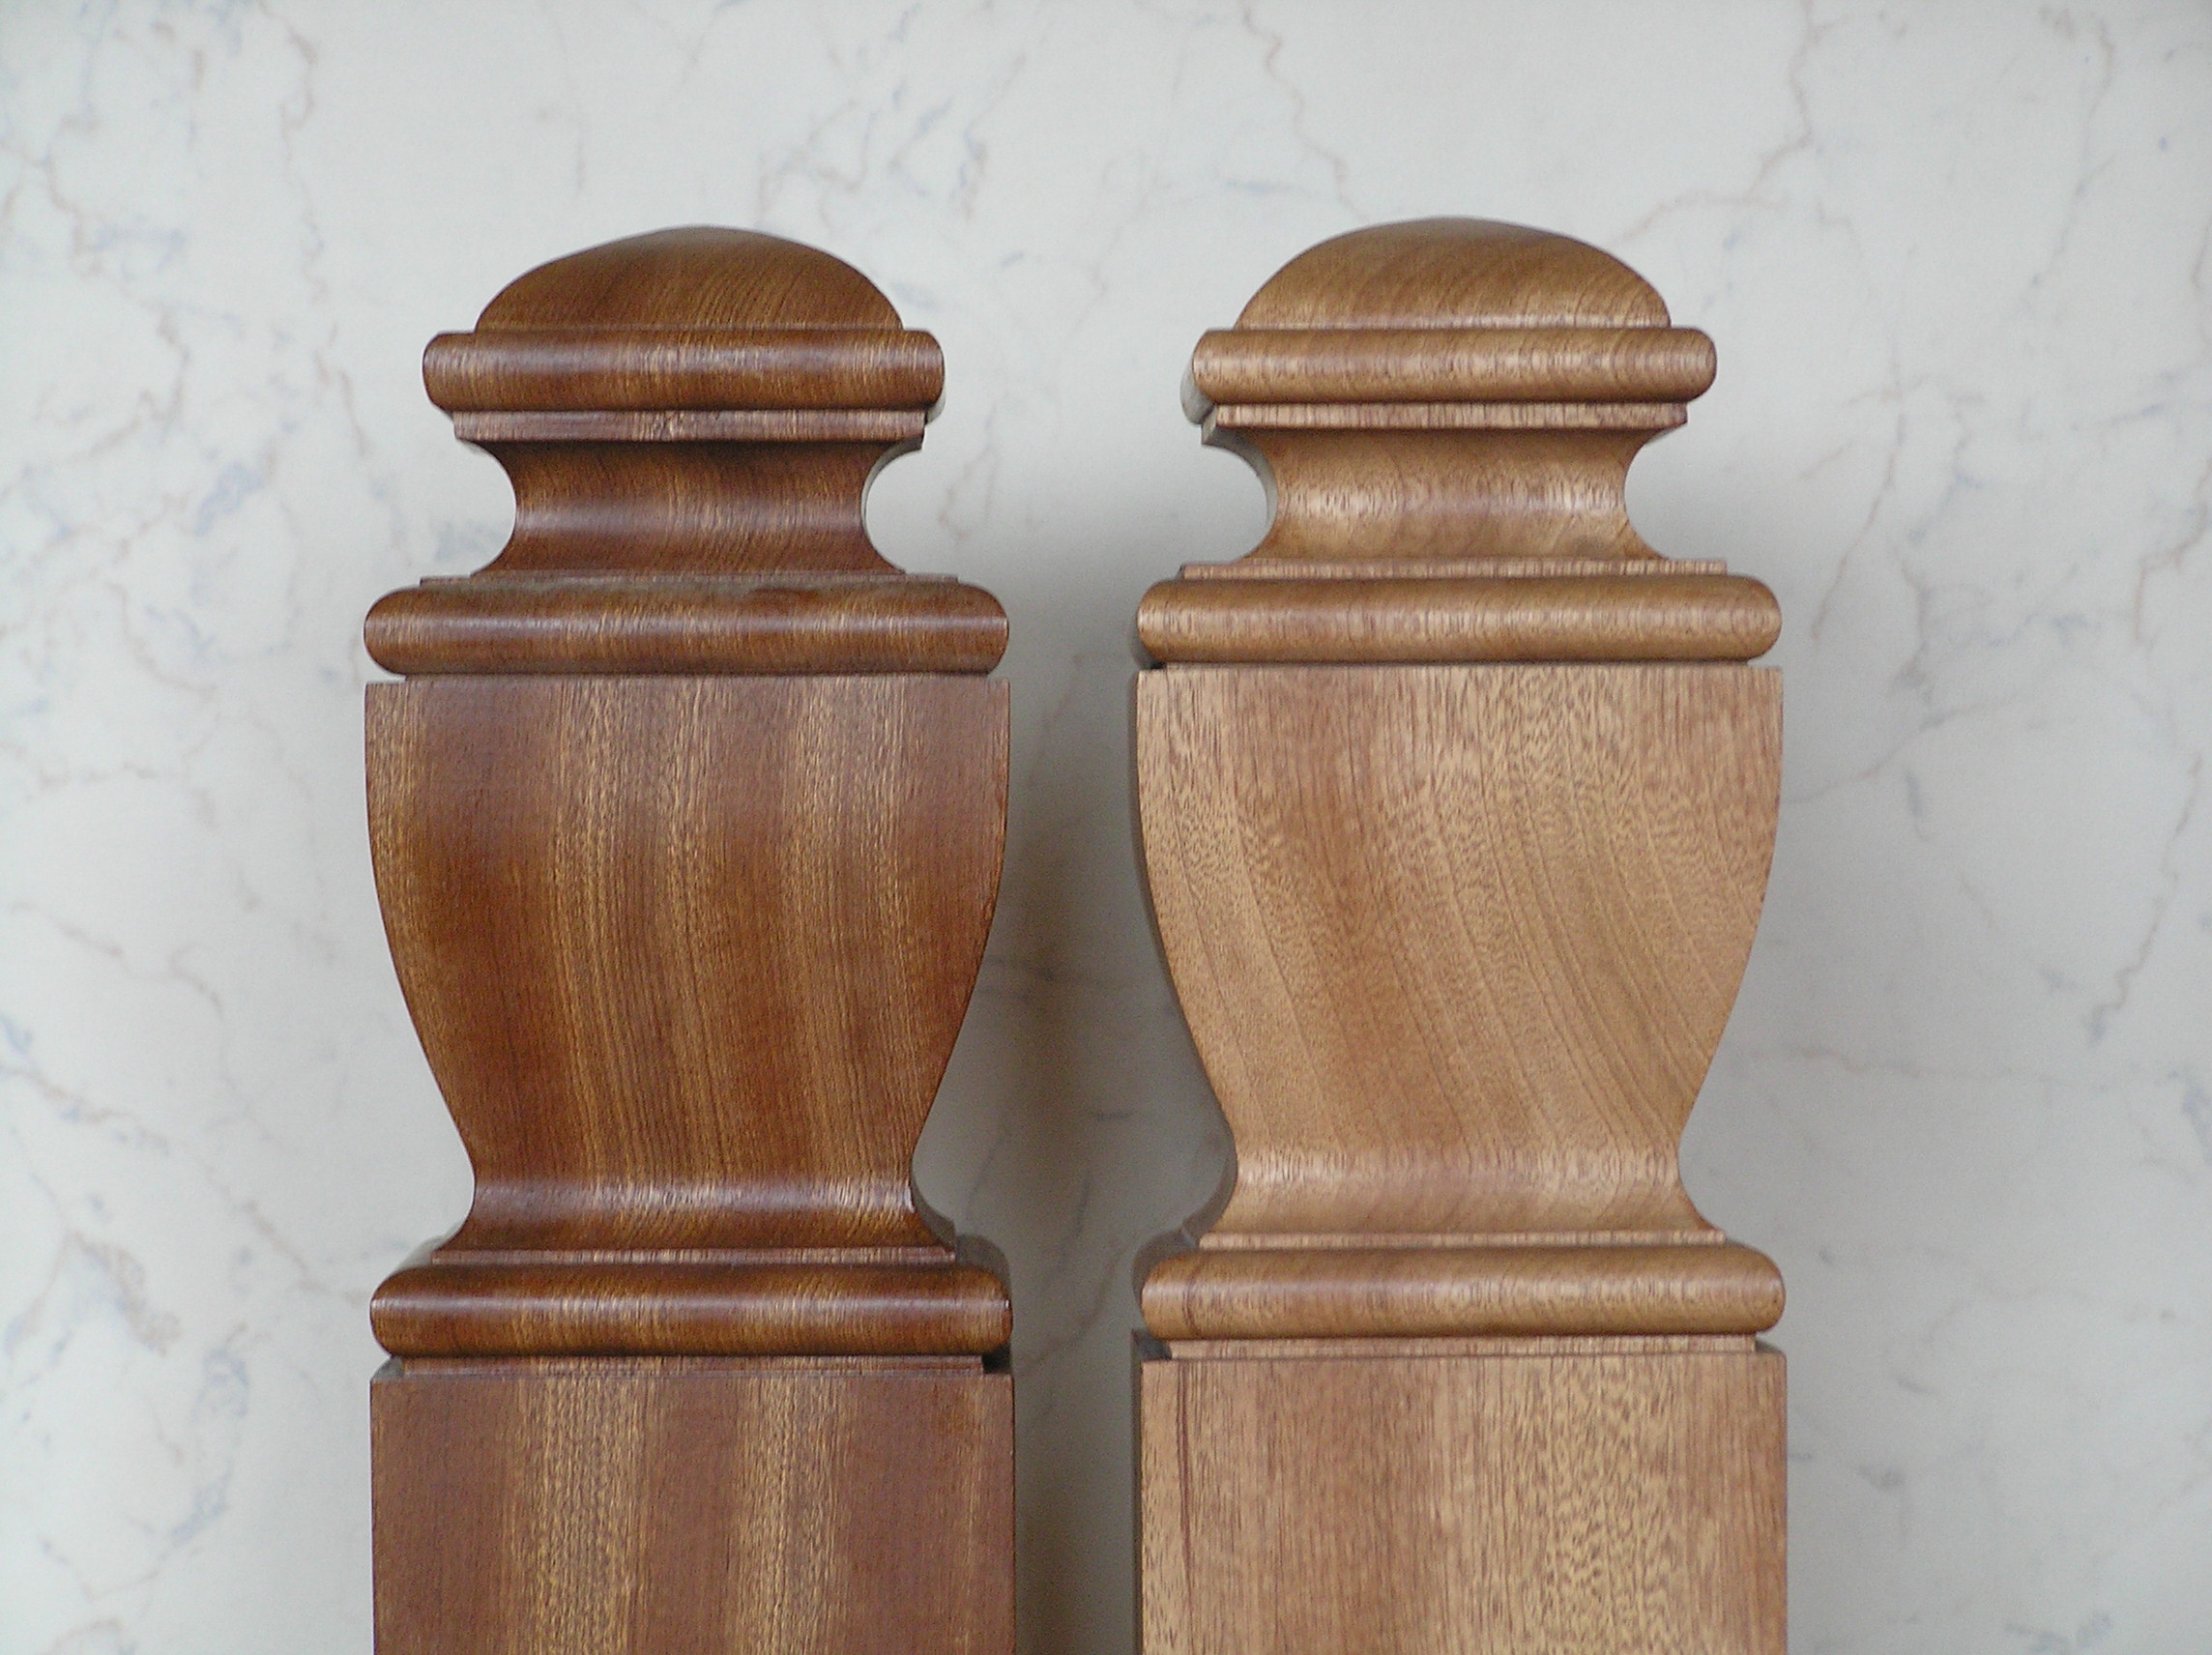 square mahogany newel cap, newel caps, square-section, to fit square newel posts, staircase restoration, conservation, custom made, bespoke,